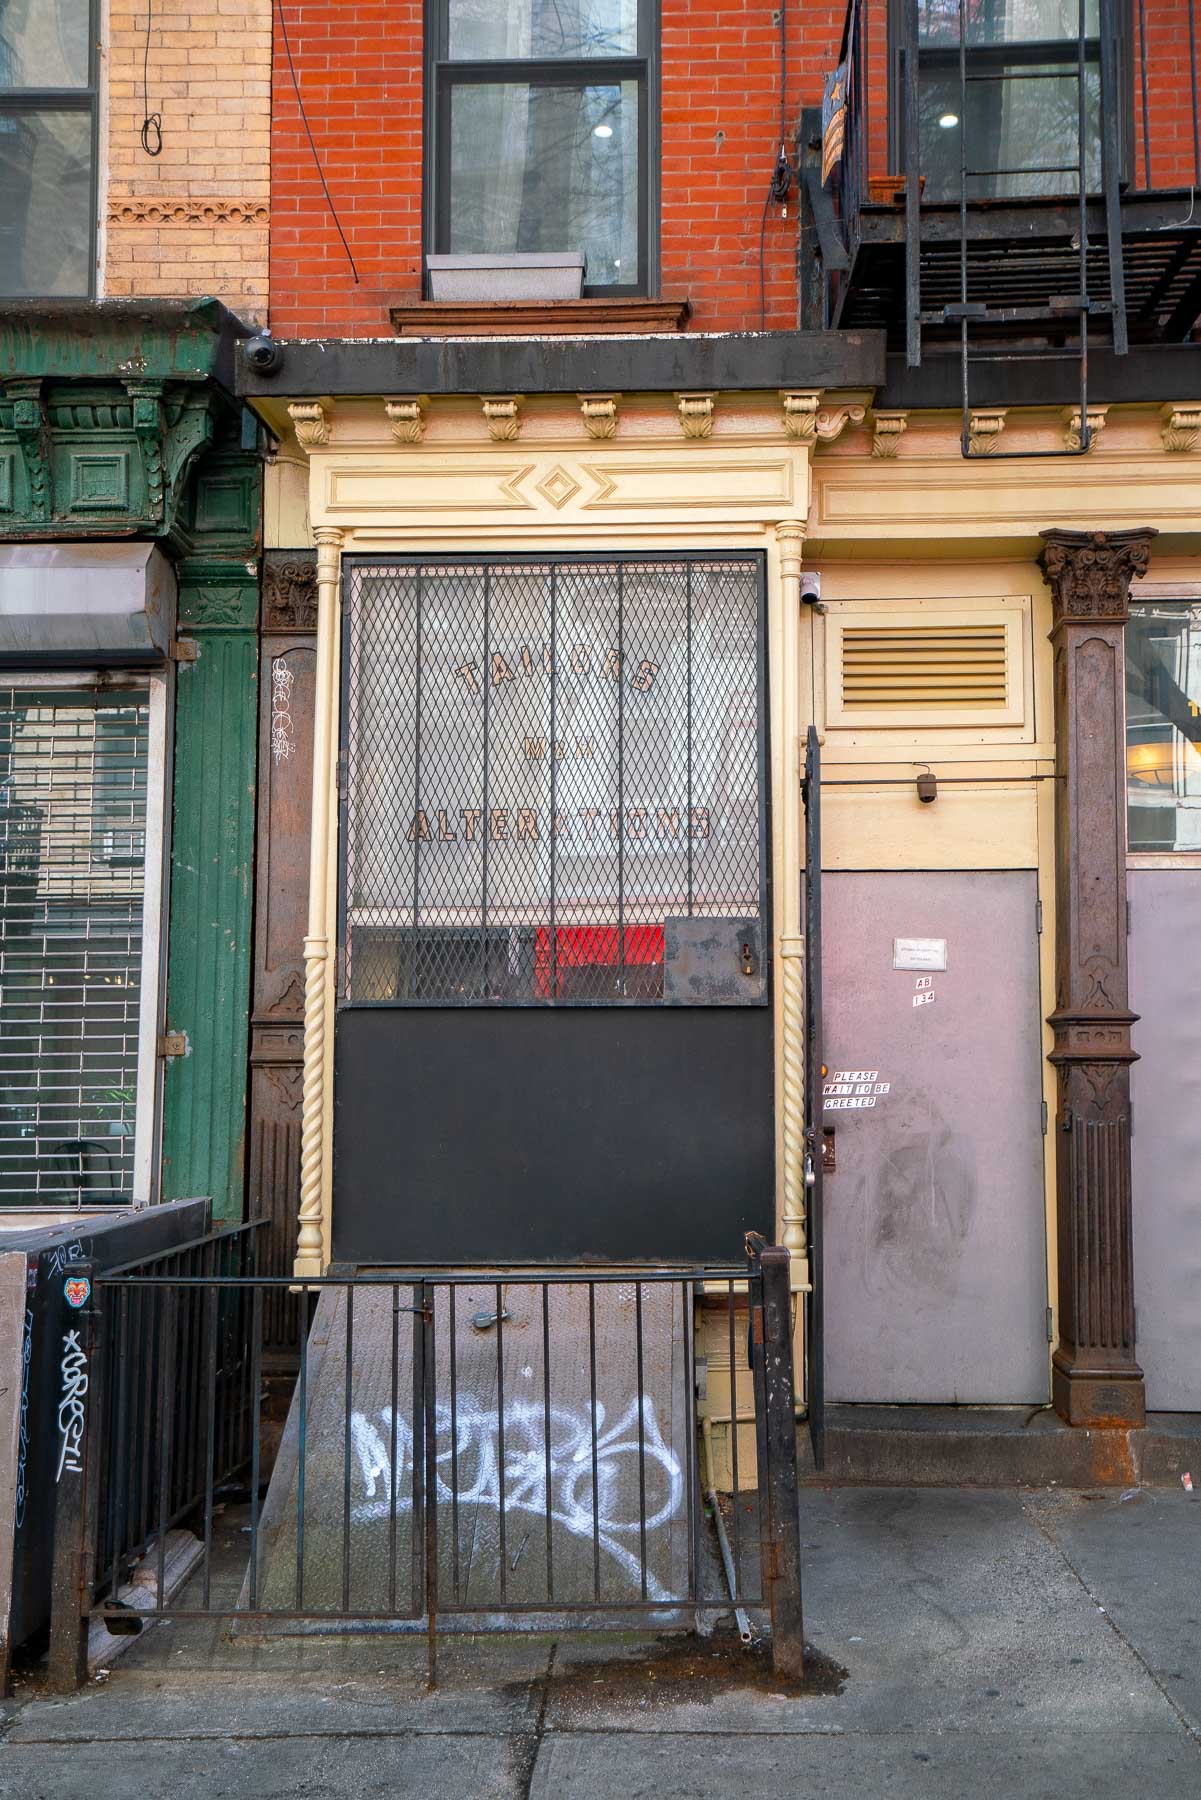 Exterior of Attaboy, which has no signage except for an AB on the door